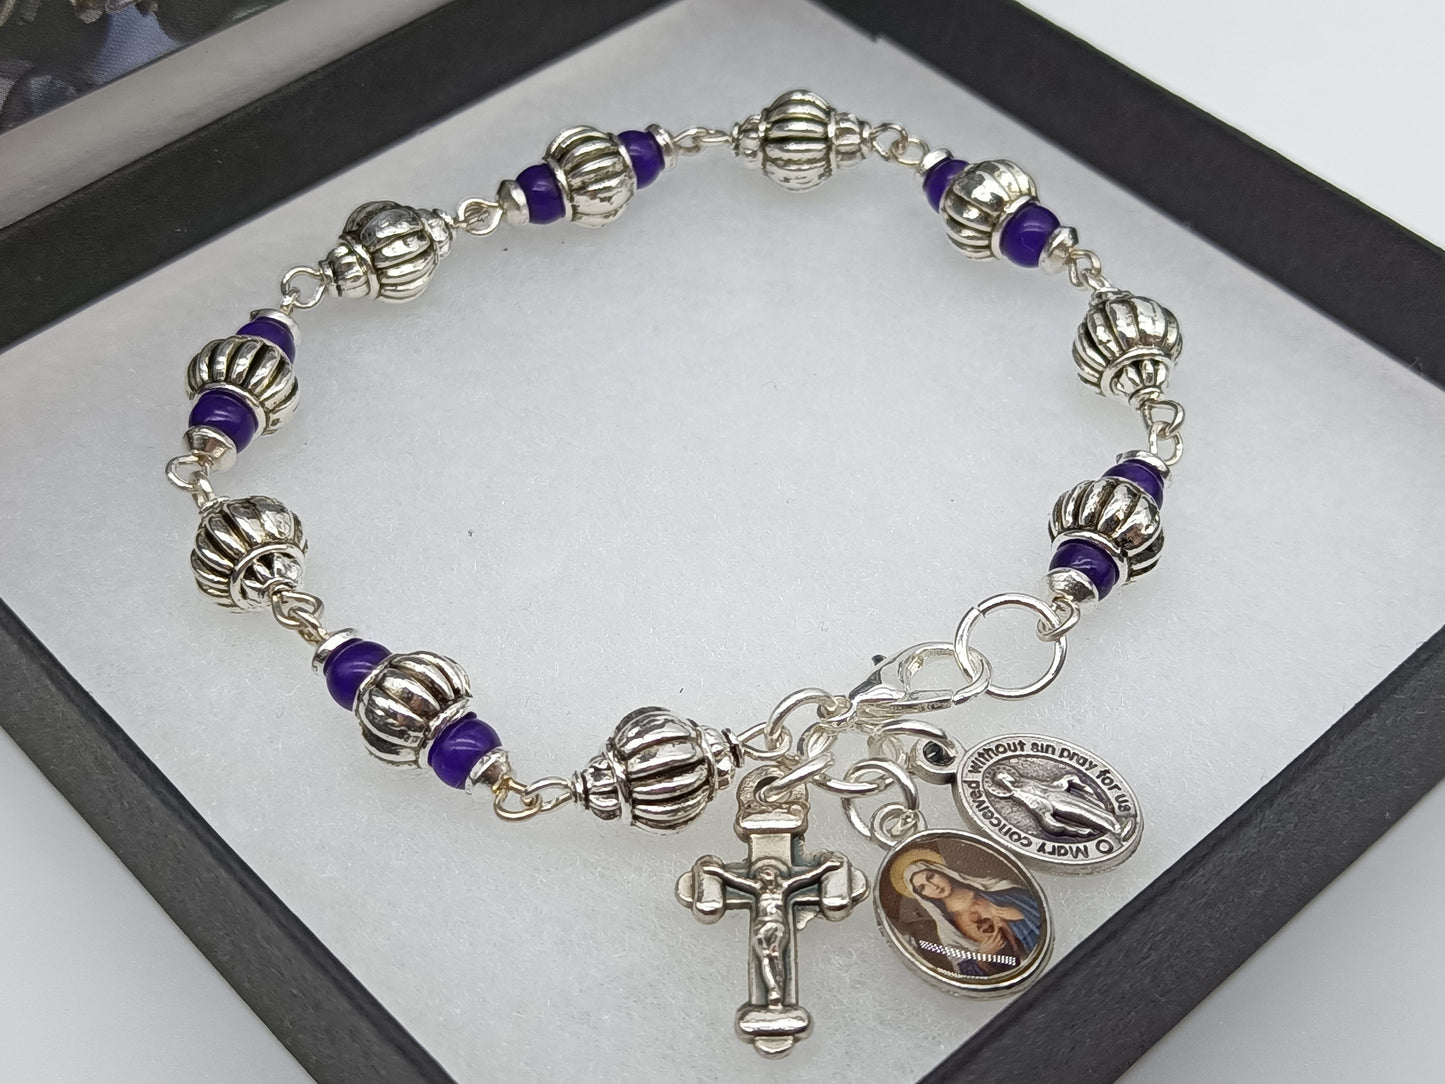 Immaculate heart of mary bracelet, Amethyst and silver Rosary decade bracelet, Miraculous medal bracelet, religious jewellery, crucifix.